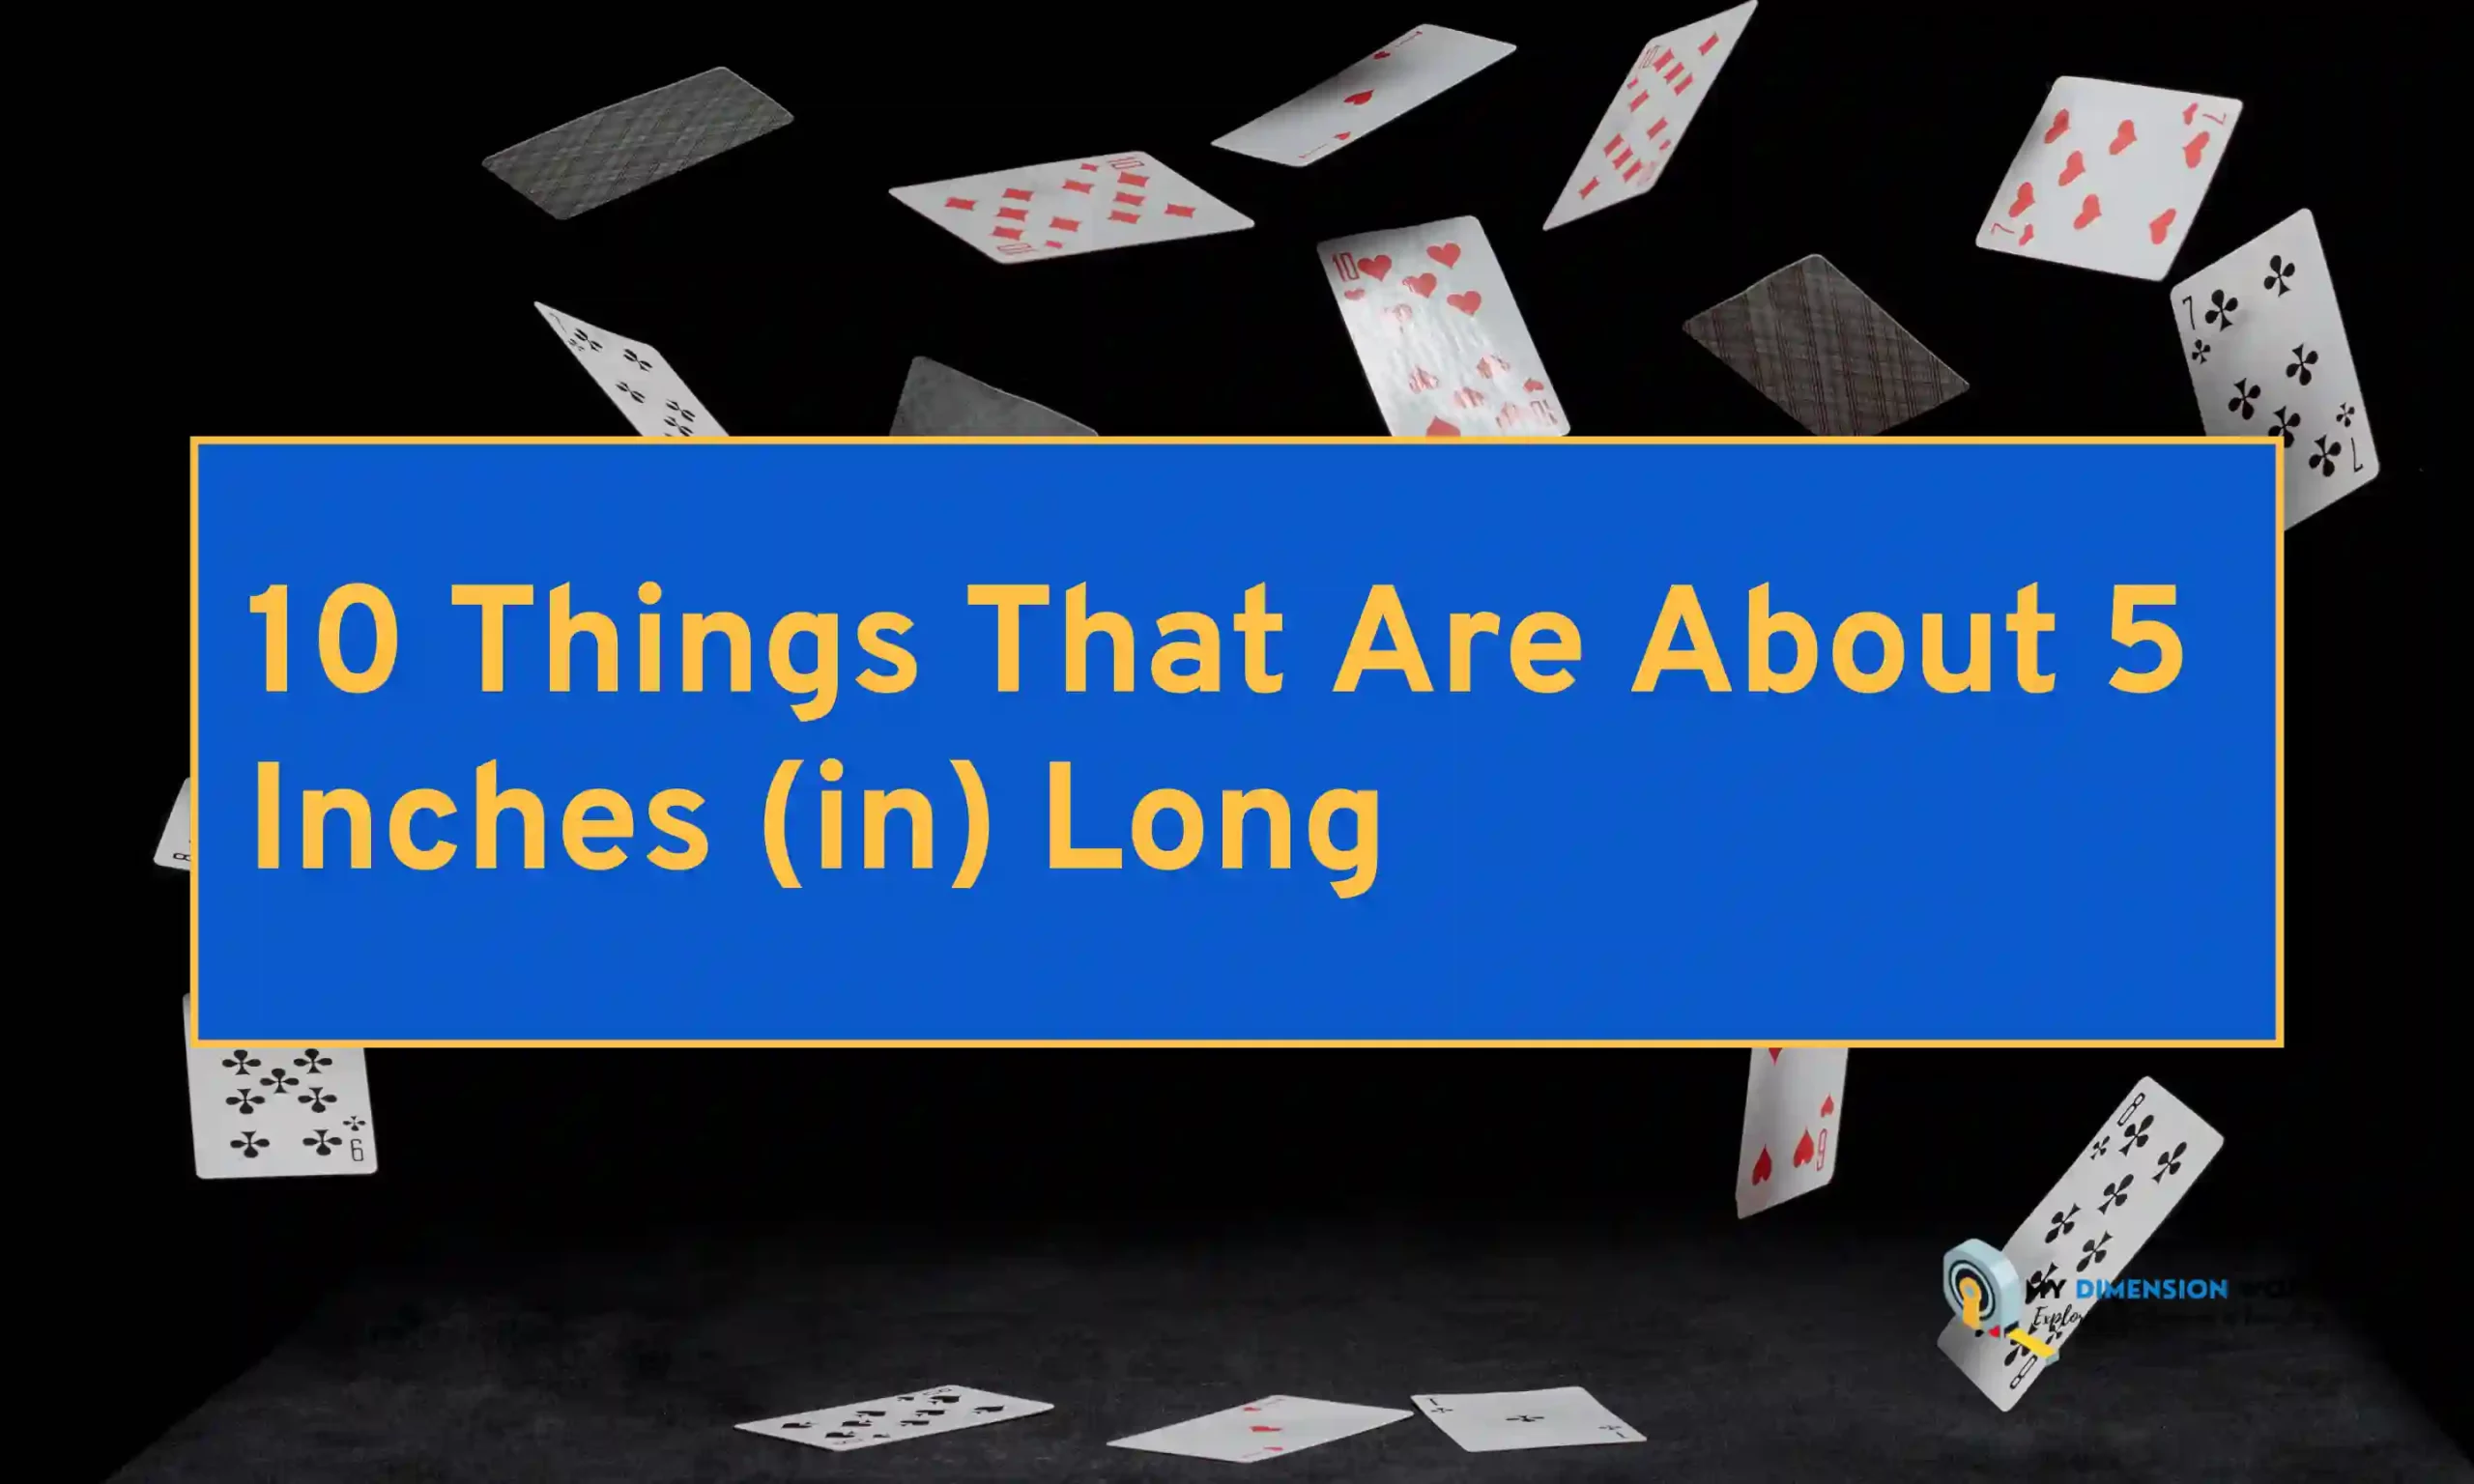 10 Things That Are About 5 Inches (in) Long